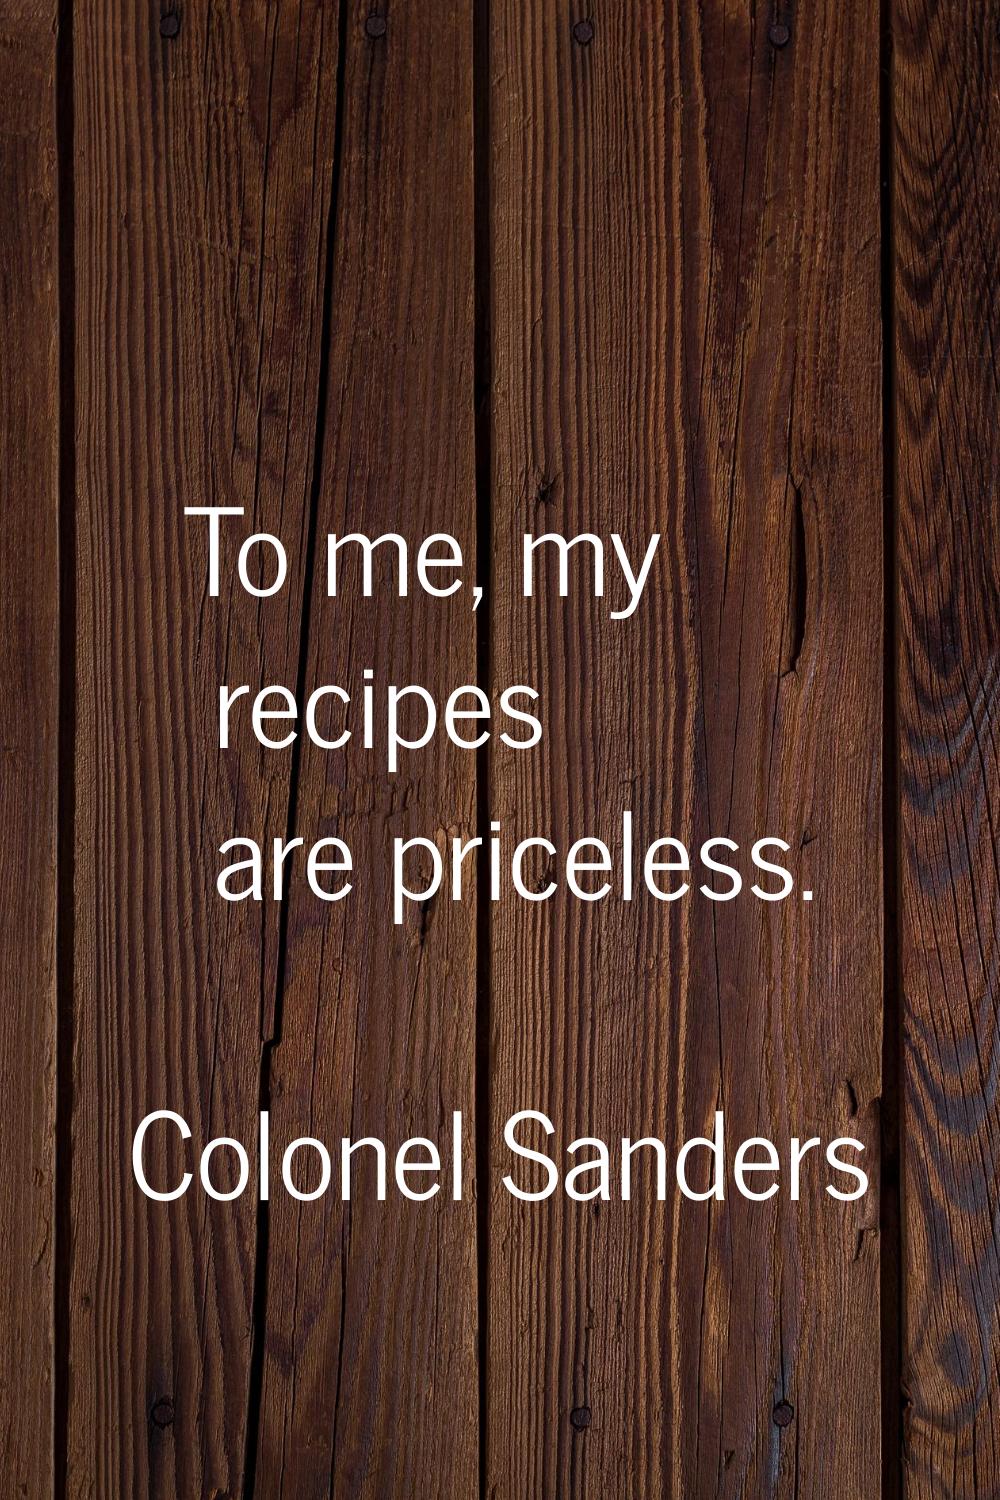 To me, my recipes are priceless.